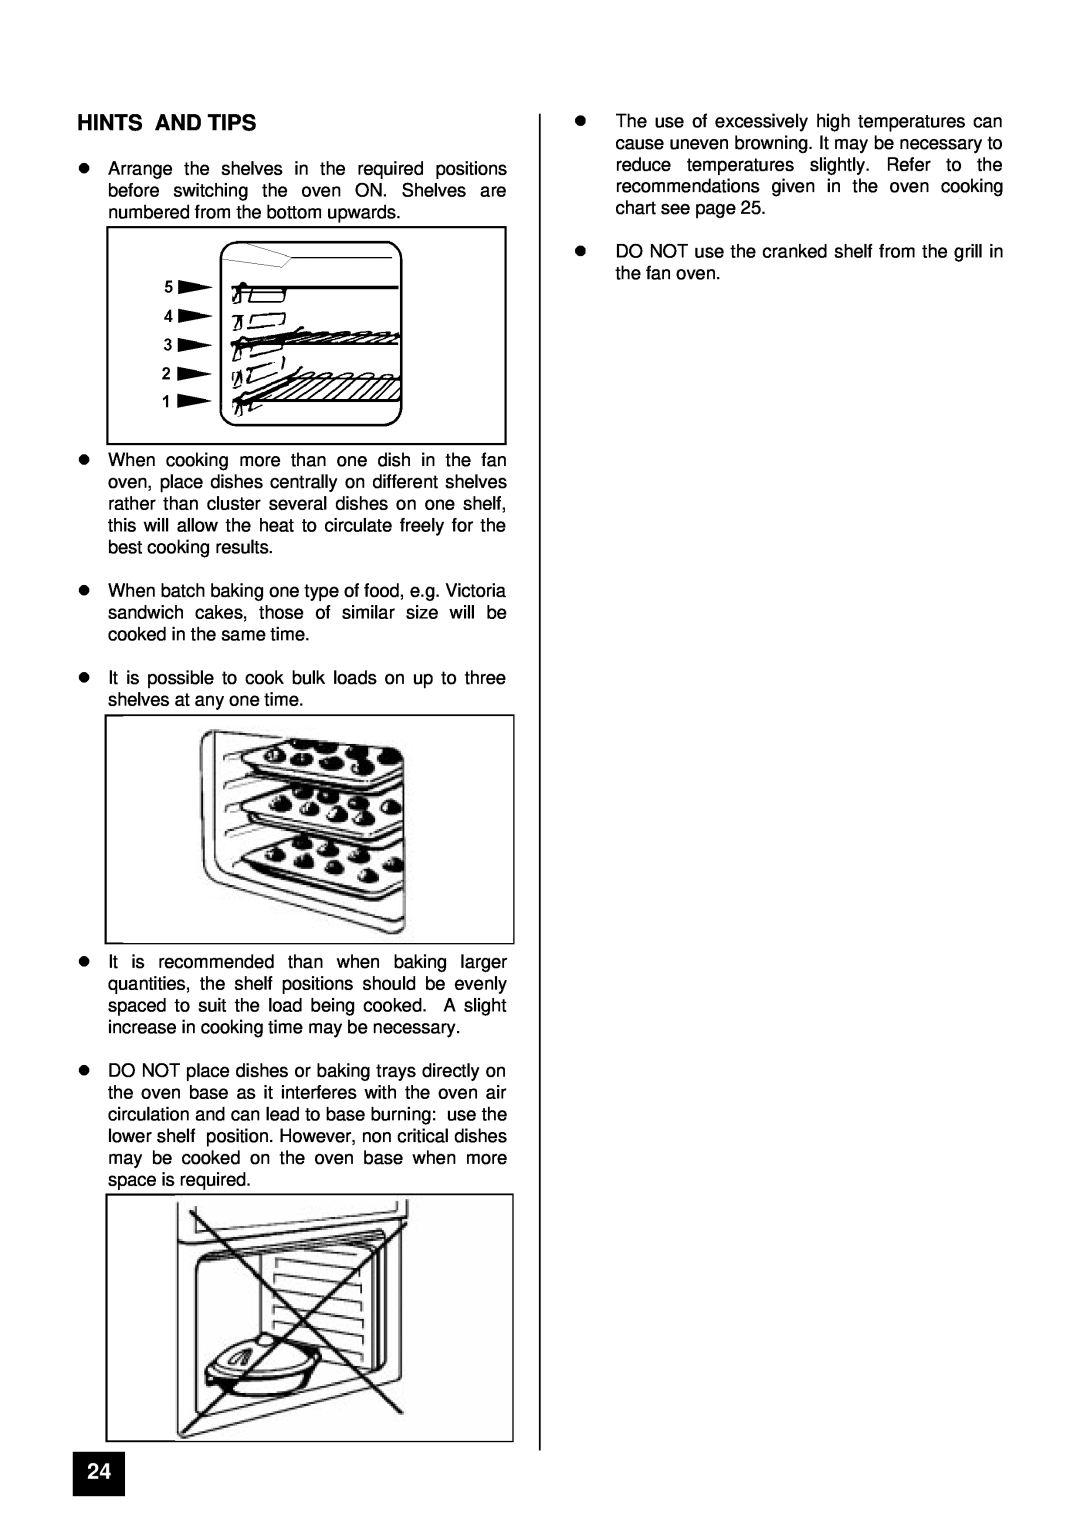 Zanussi ZCE 7400 manual lHINTS AND TIPS, l cooked in the same time 